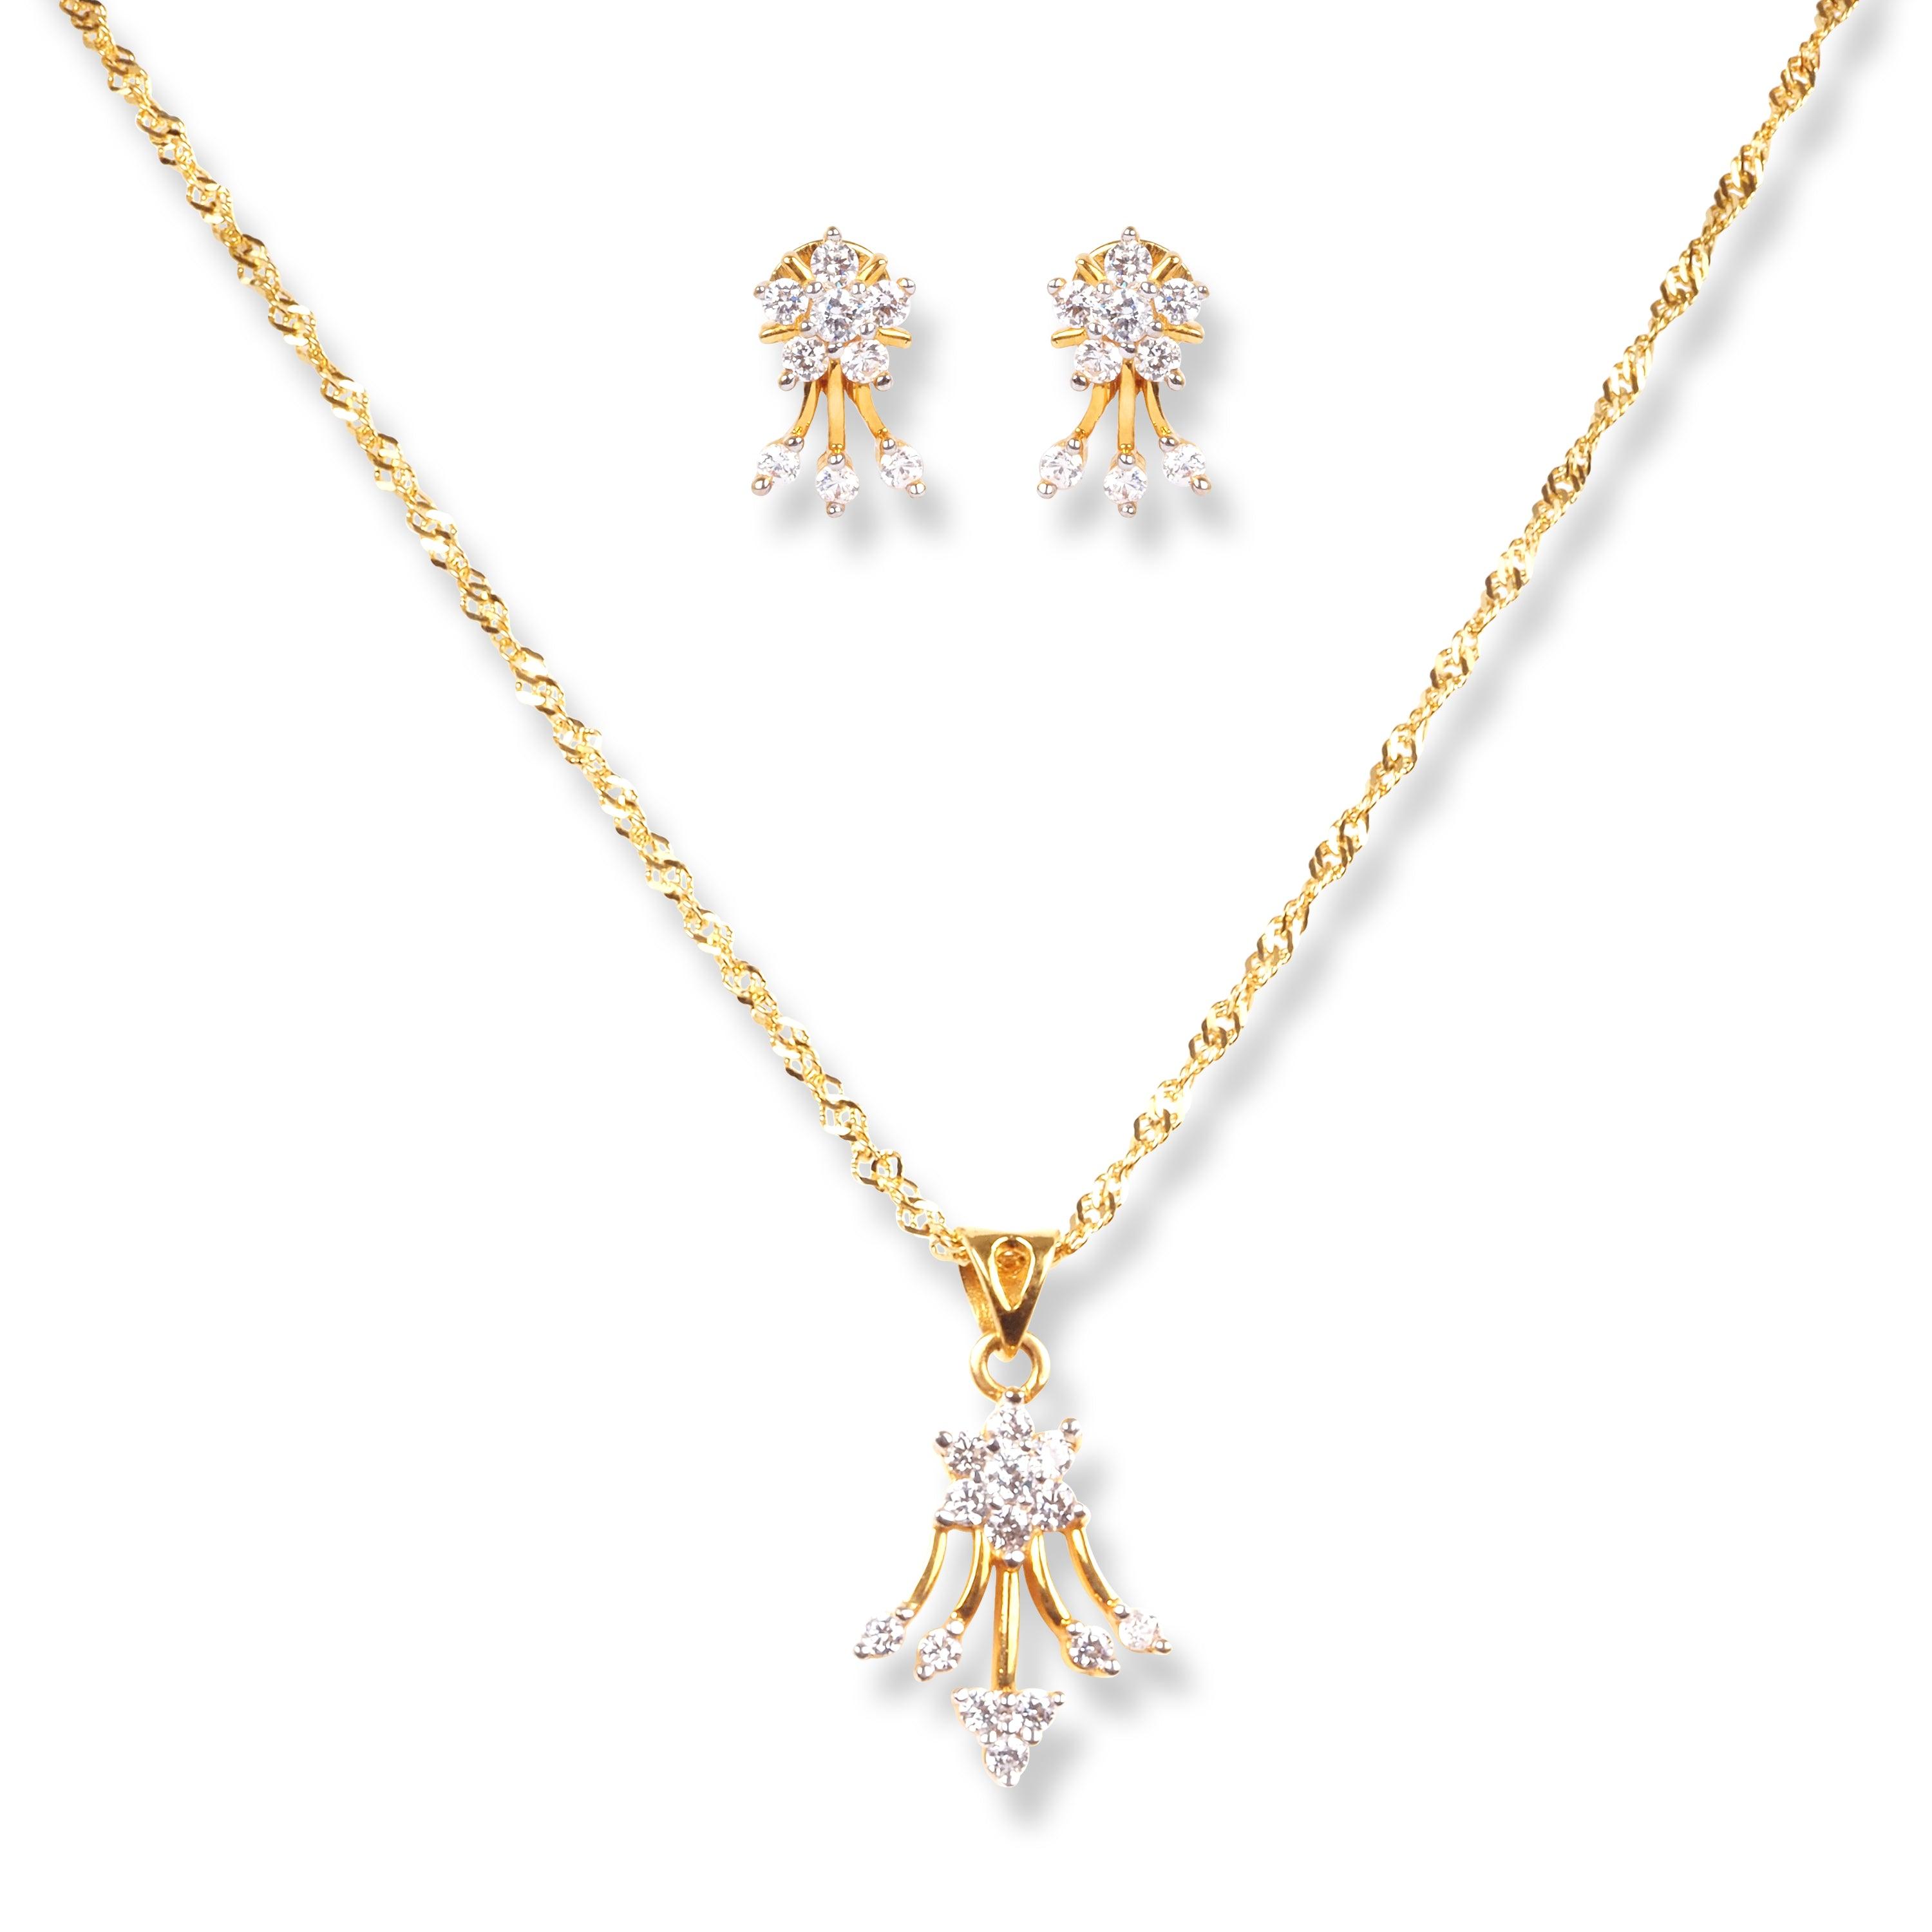 22ct Gold Set with Cubic Zirconia Stones (Pendant + Chain + Stud Earrings) - Minar Jewellers